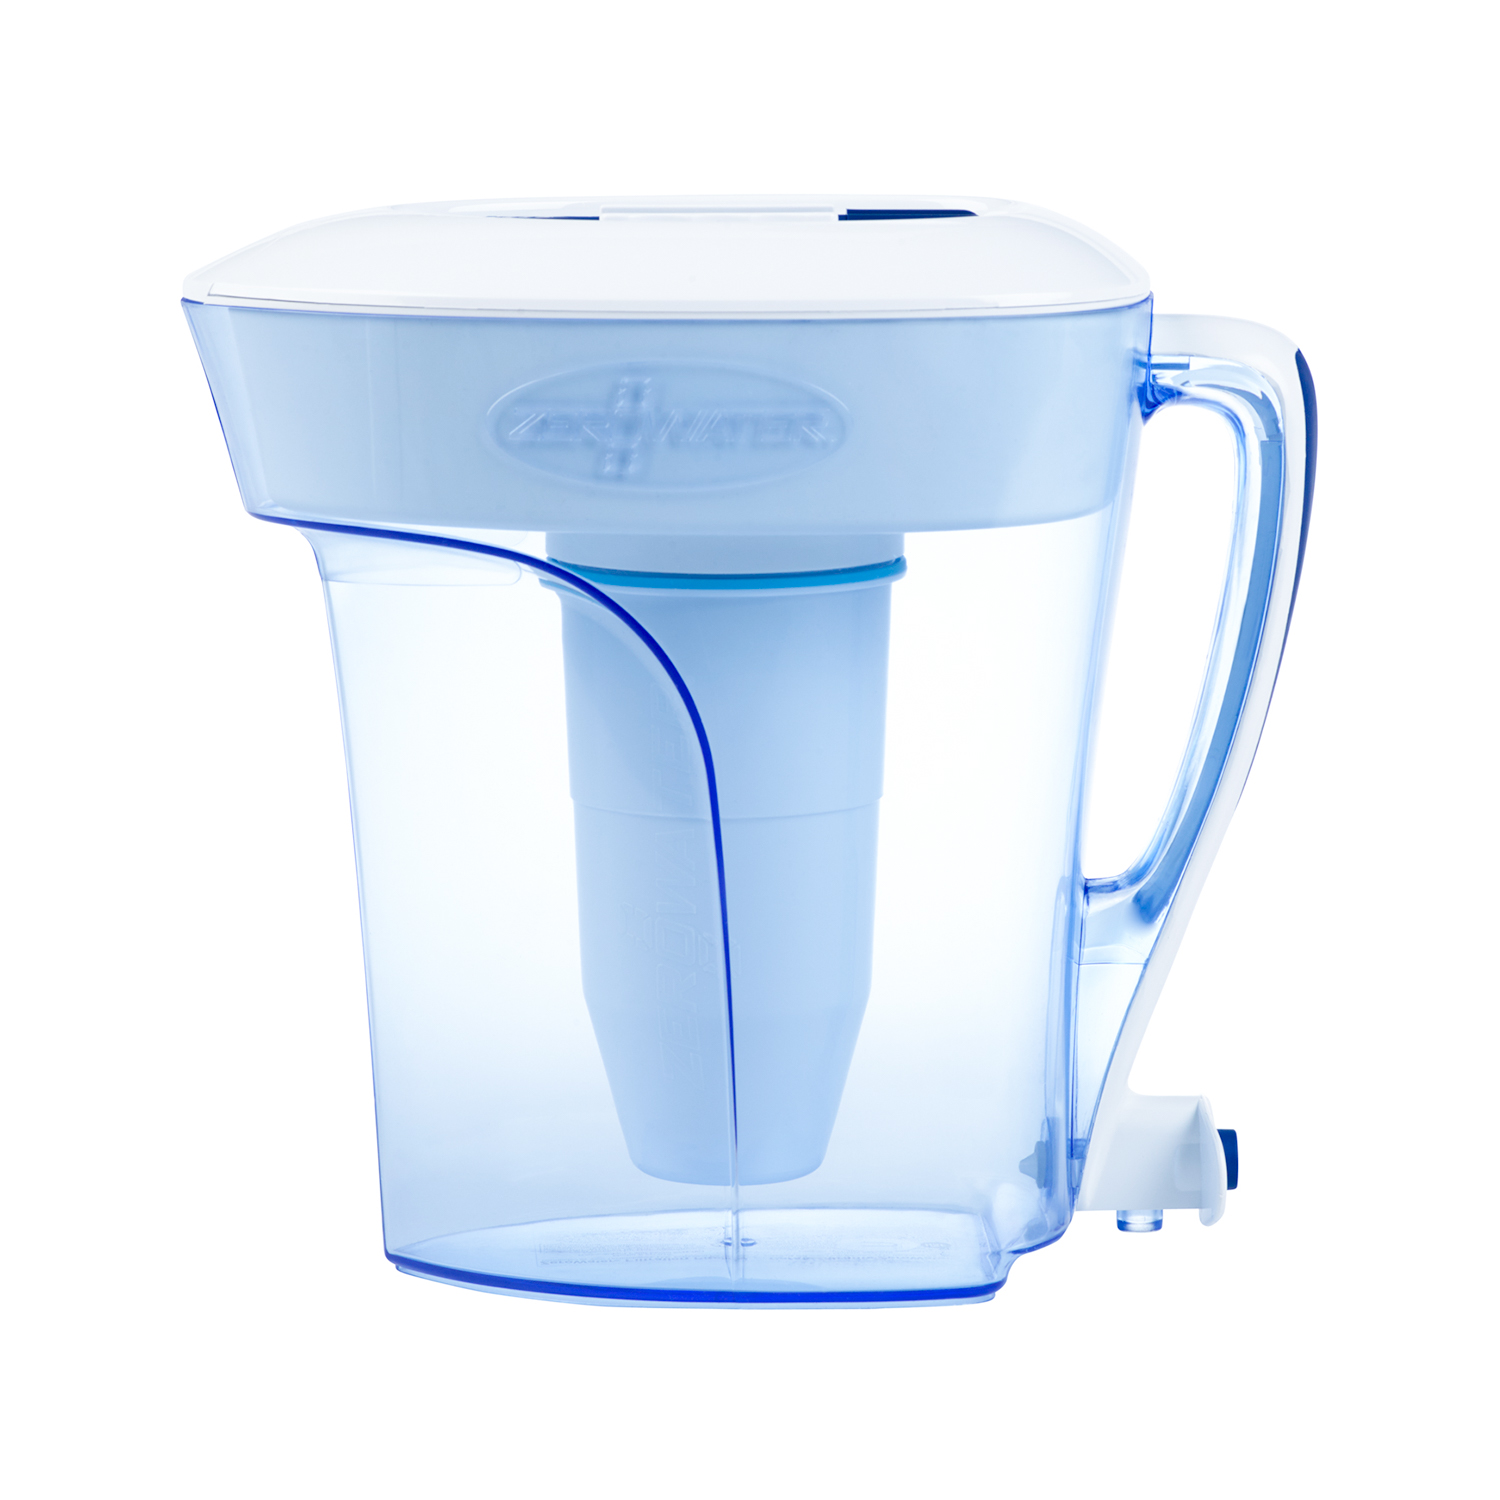 Ten cup pitcher with filter inside